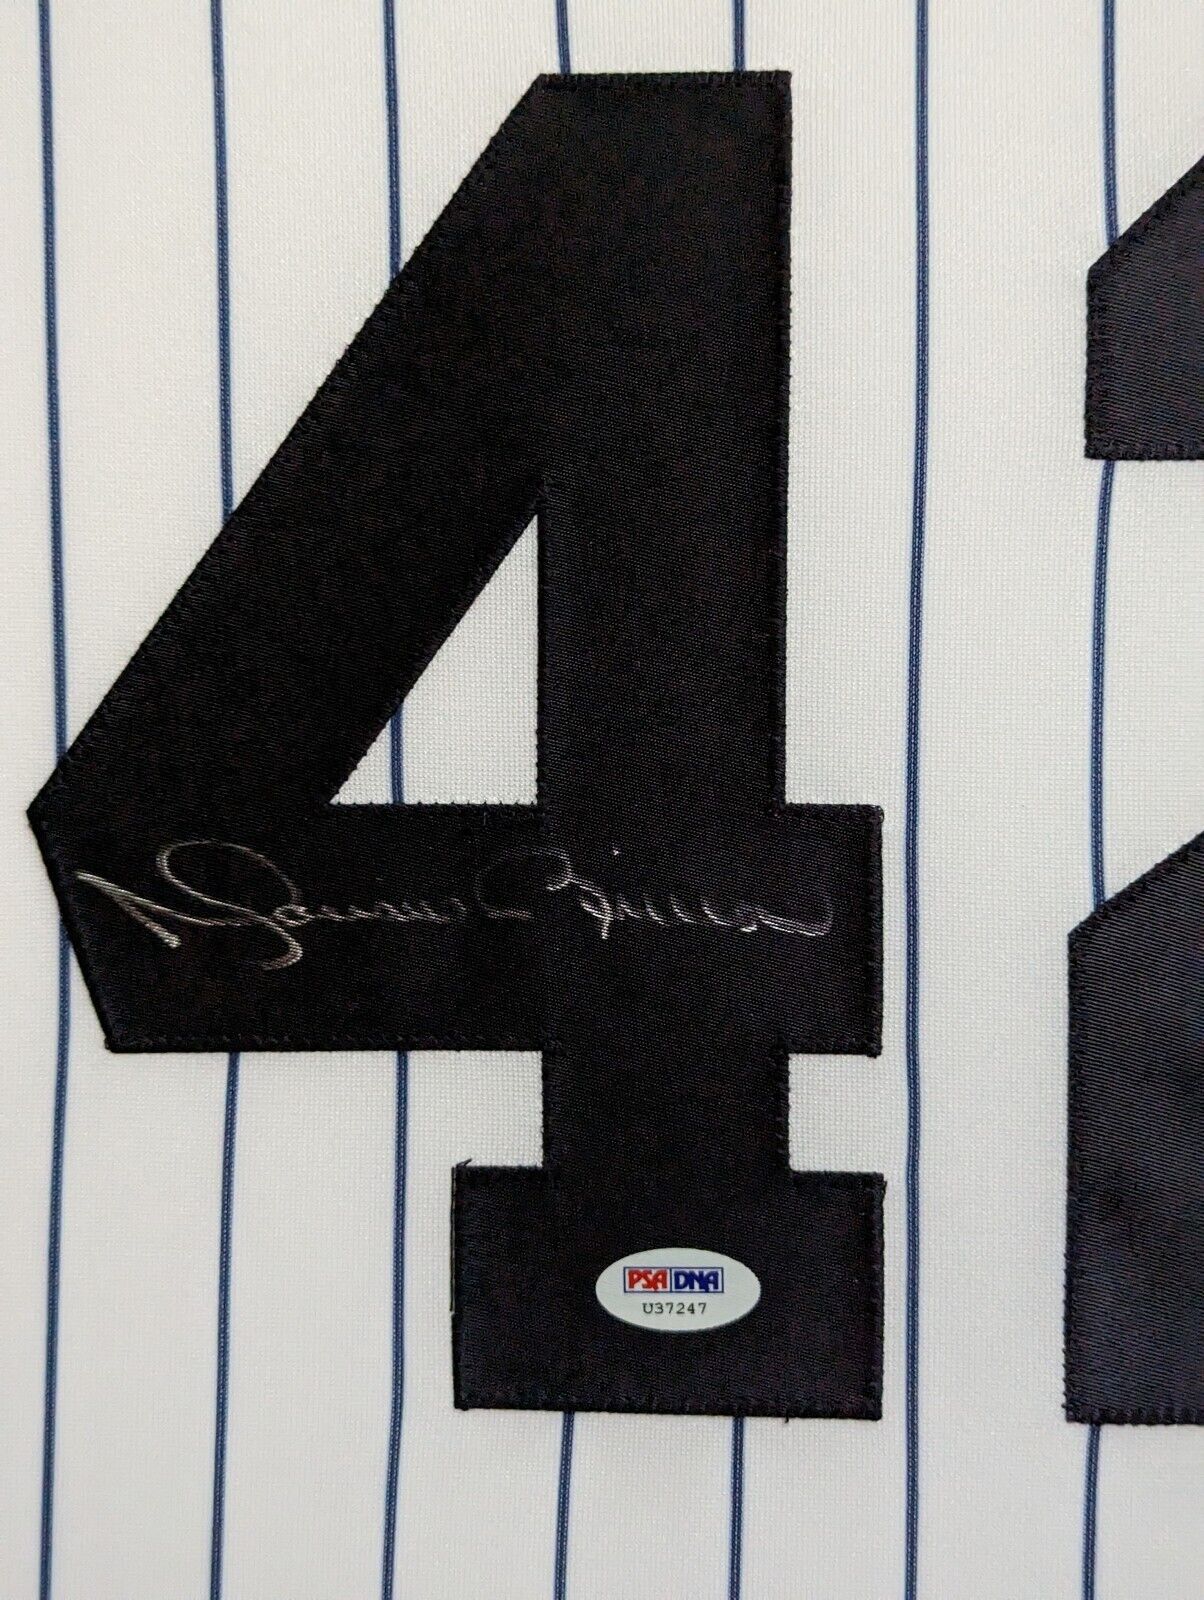 MVP Authentics Framed New York Yankees Mariano Rivera Autographed Signed Jersey W/Patch Psa Coa 1350 sports jersey framing , jersey framing